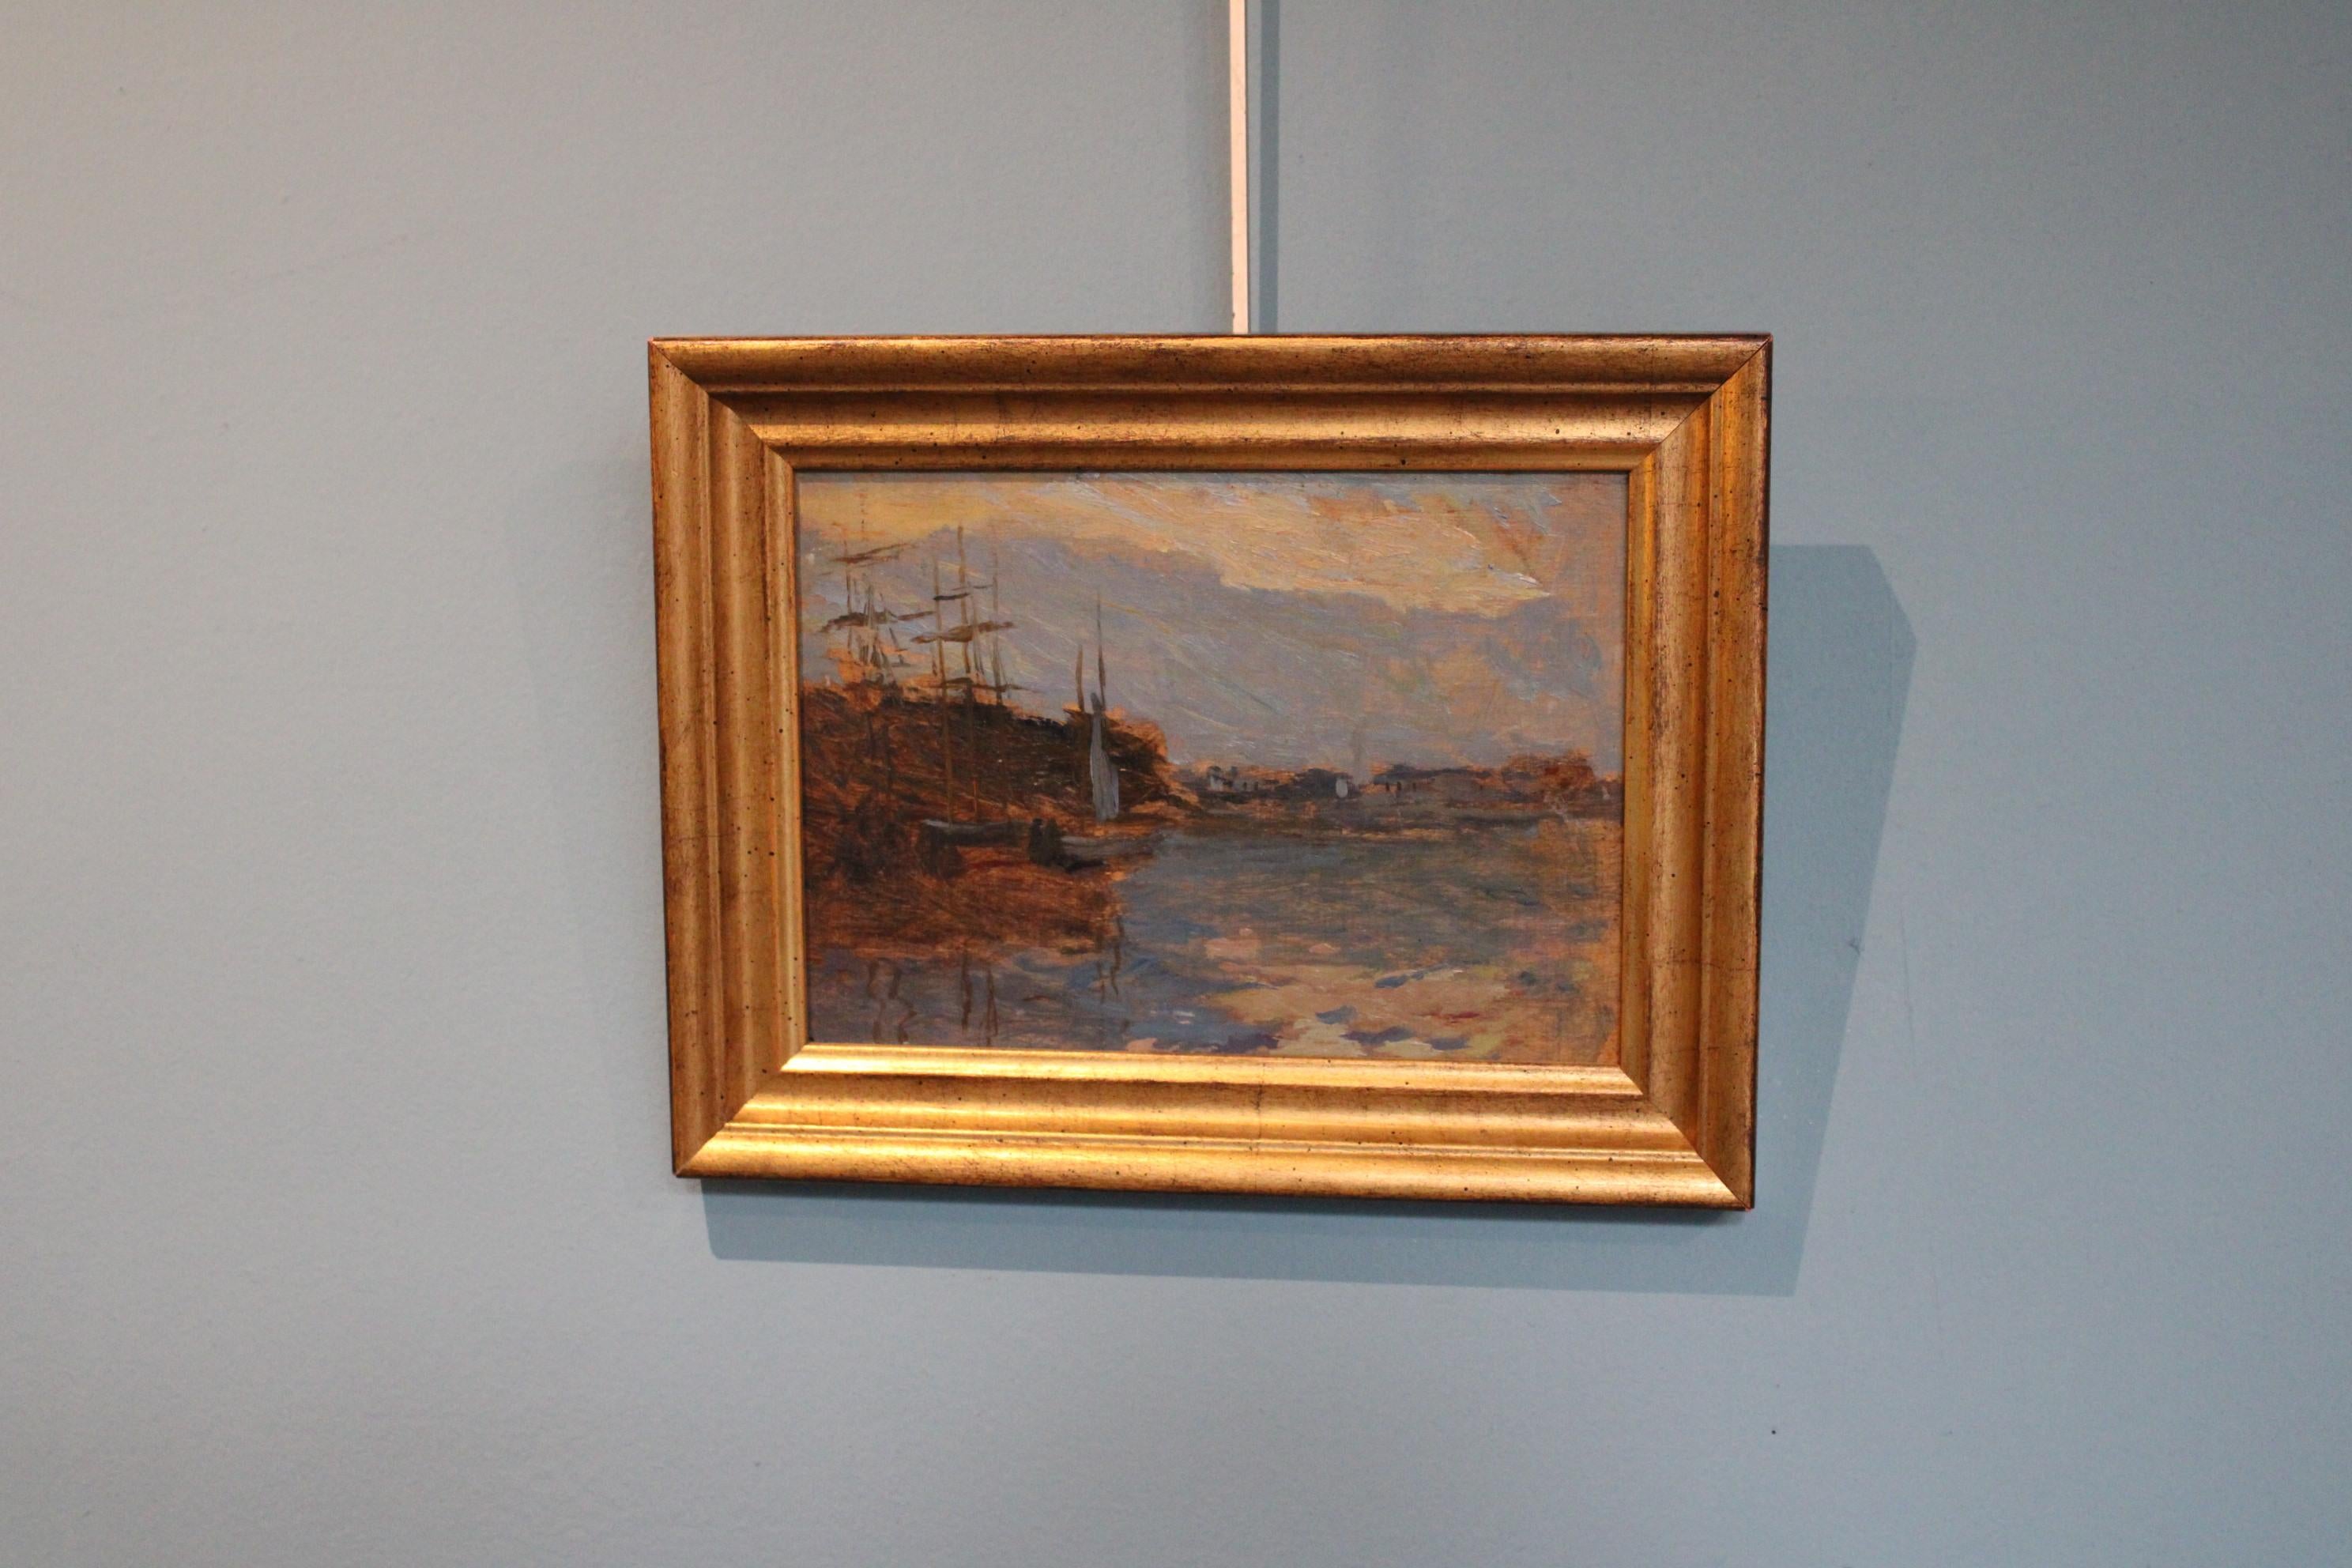 Painting oil on panel by Frank Edwin Scott (1863-1929).

Dimensions 
With frame : 27.5 x 21.5 x 2.5 cm
Without frame : 22 x 16 cm.